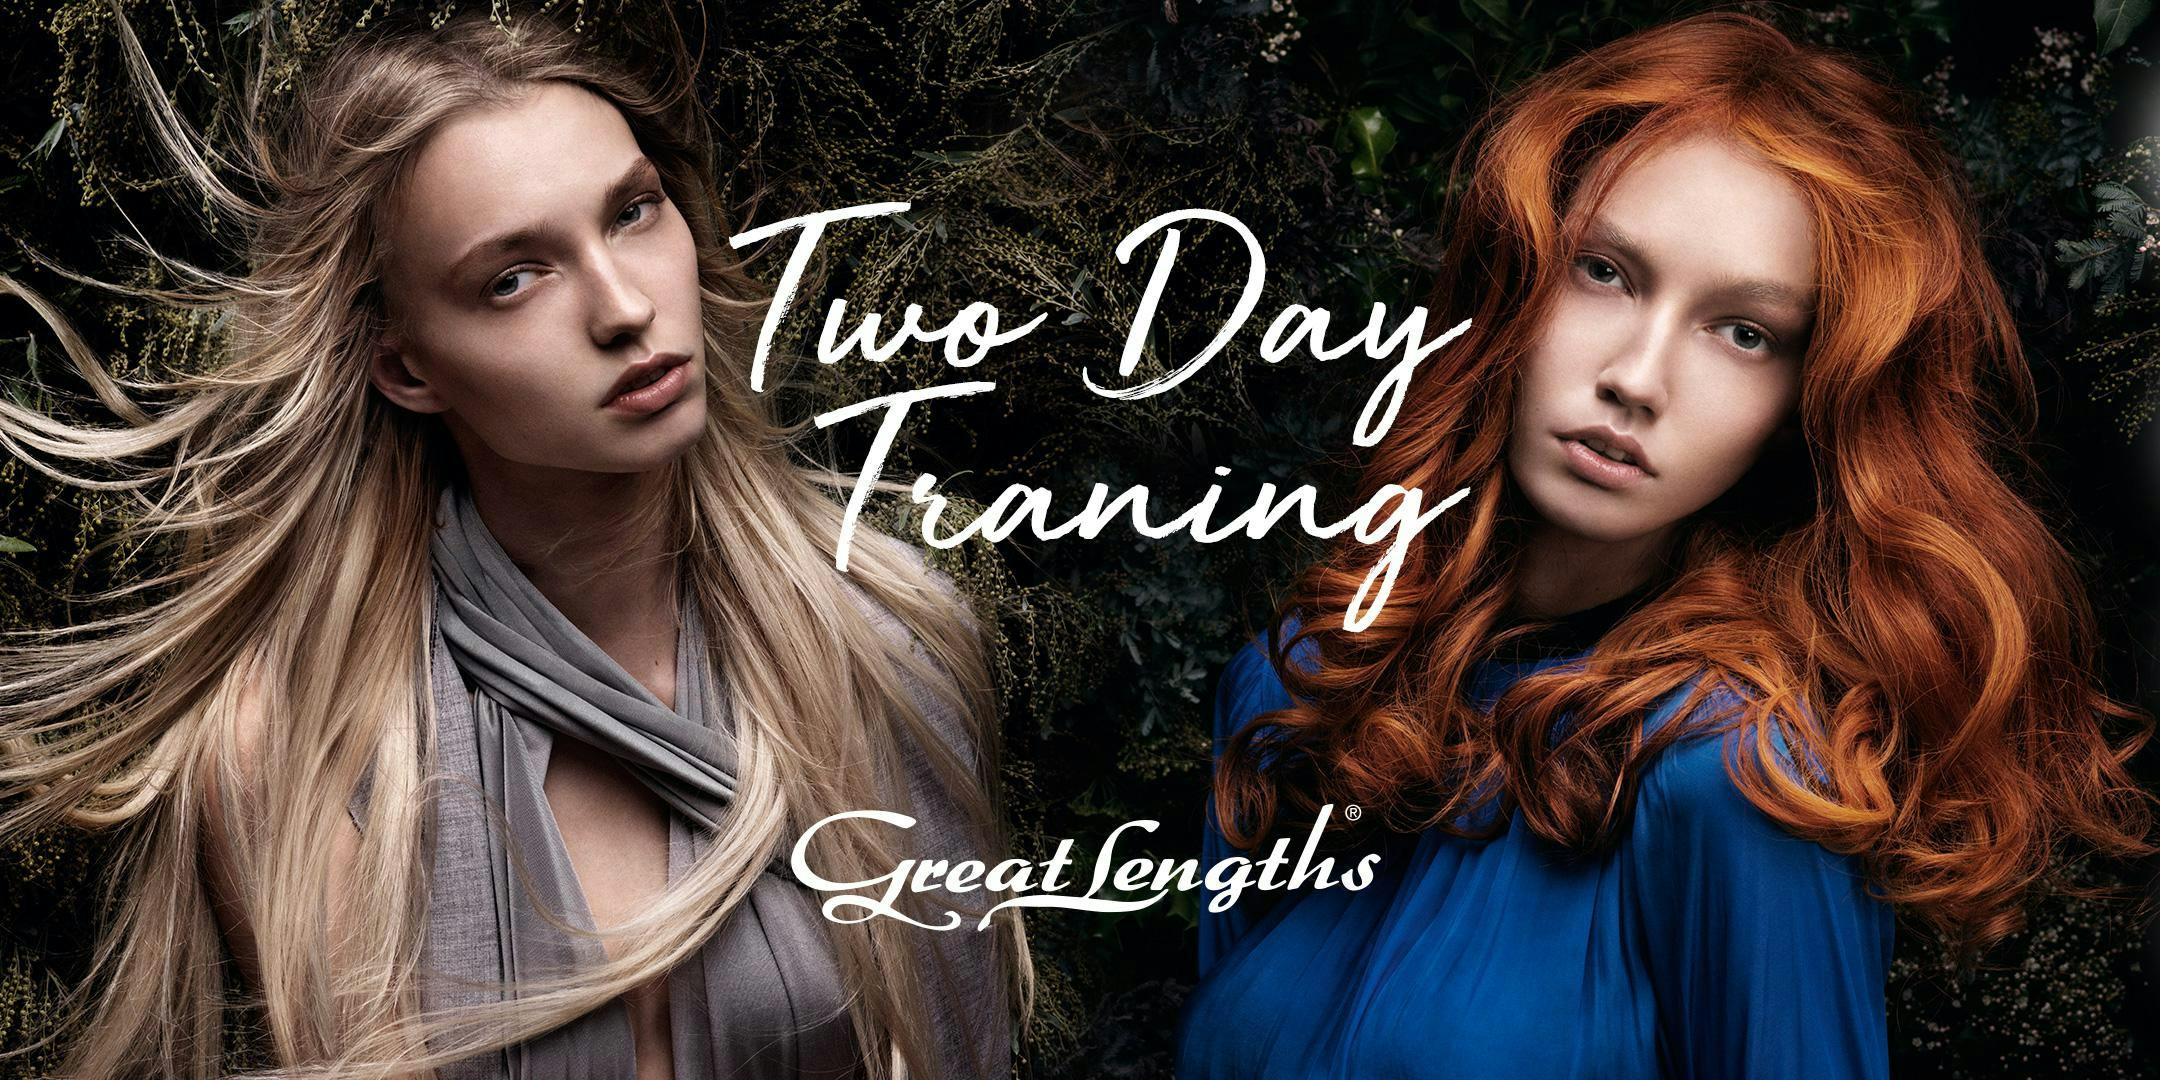 Great Lengths Training October 7/8, VIC 